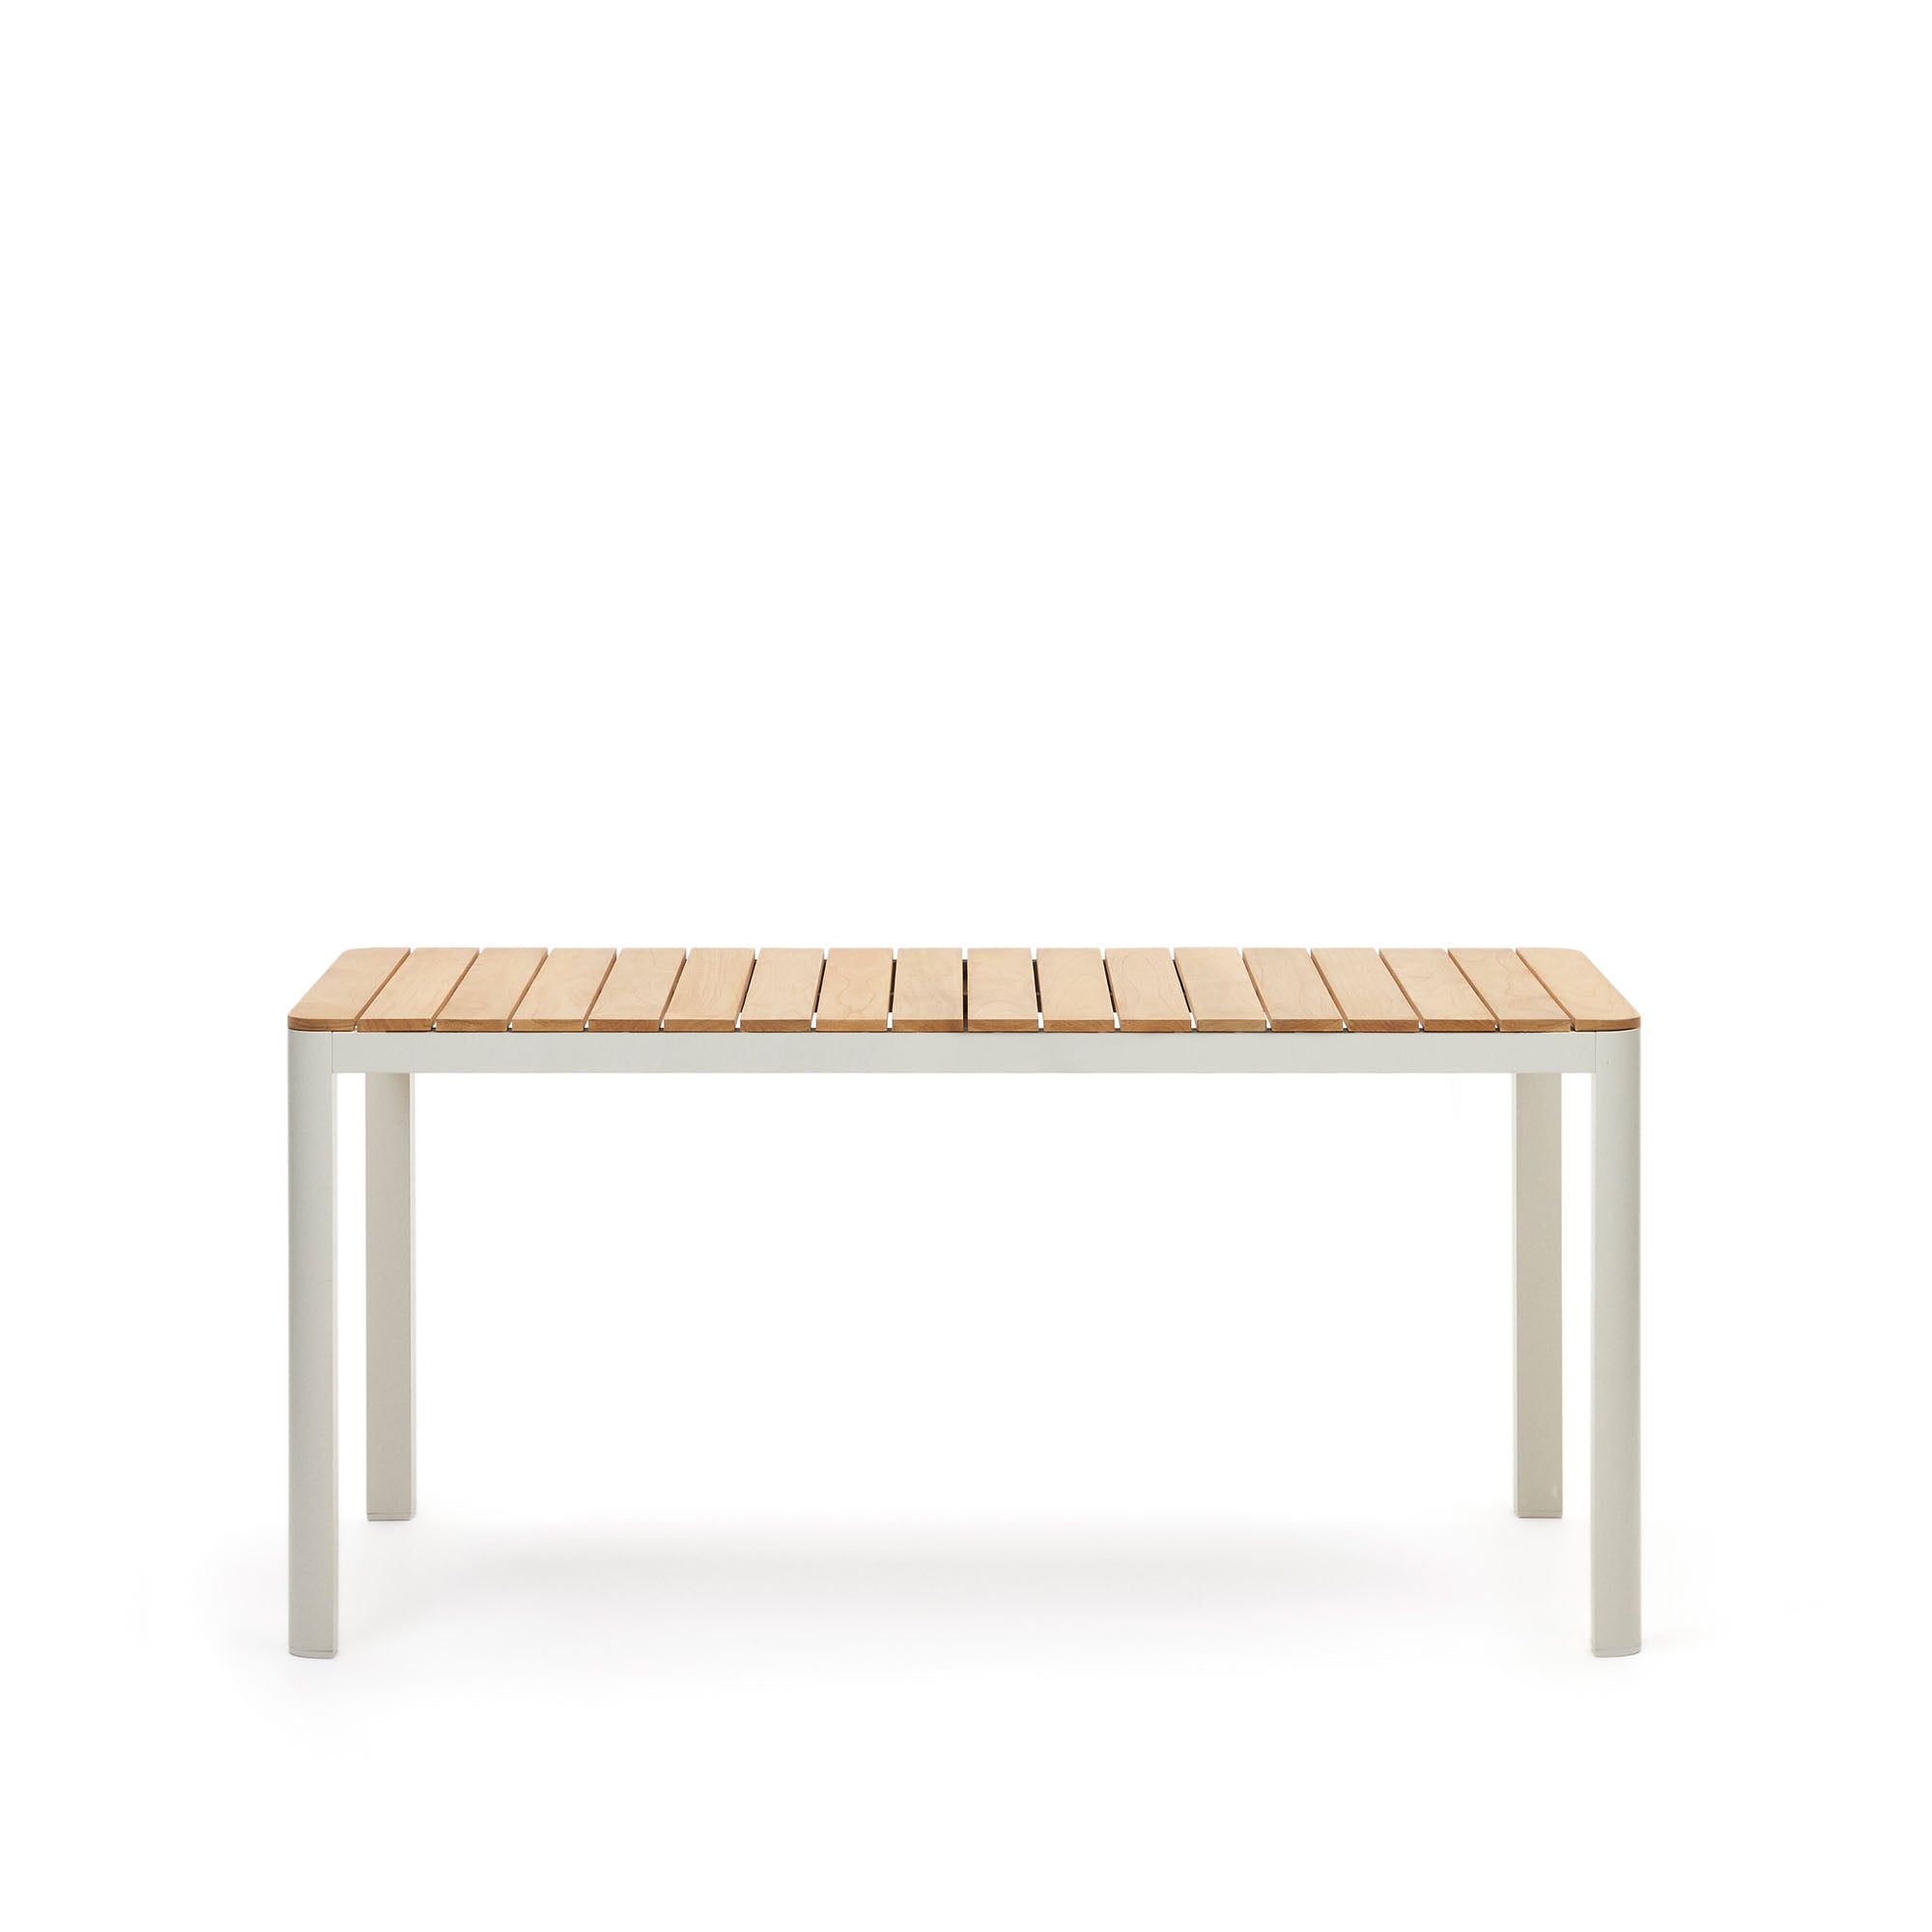 Bona aluminium and solid teak table, 100% outdoor suitable with white finish, 160 x 90 cm